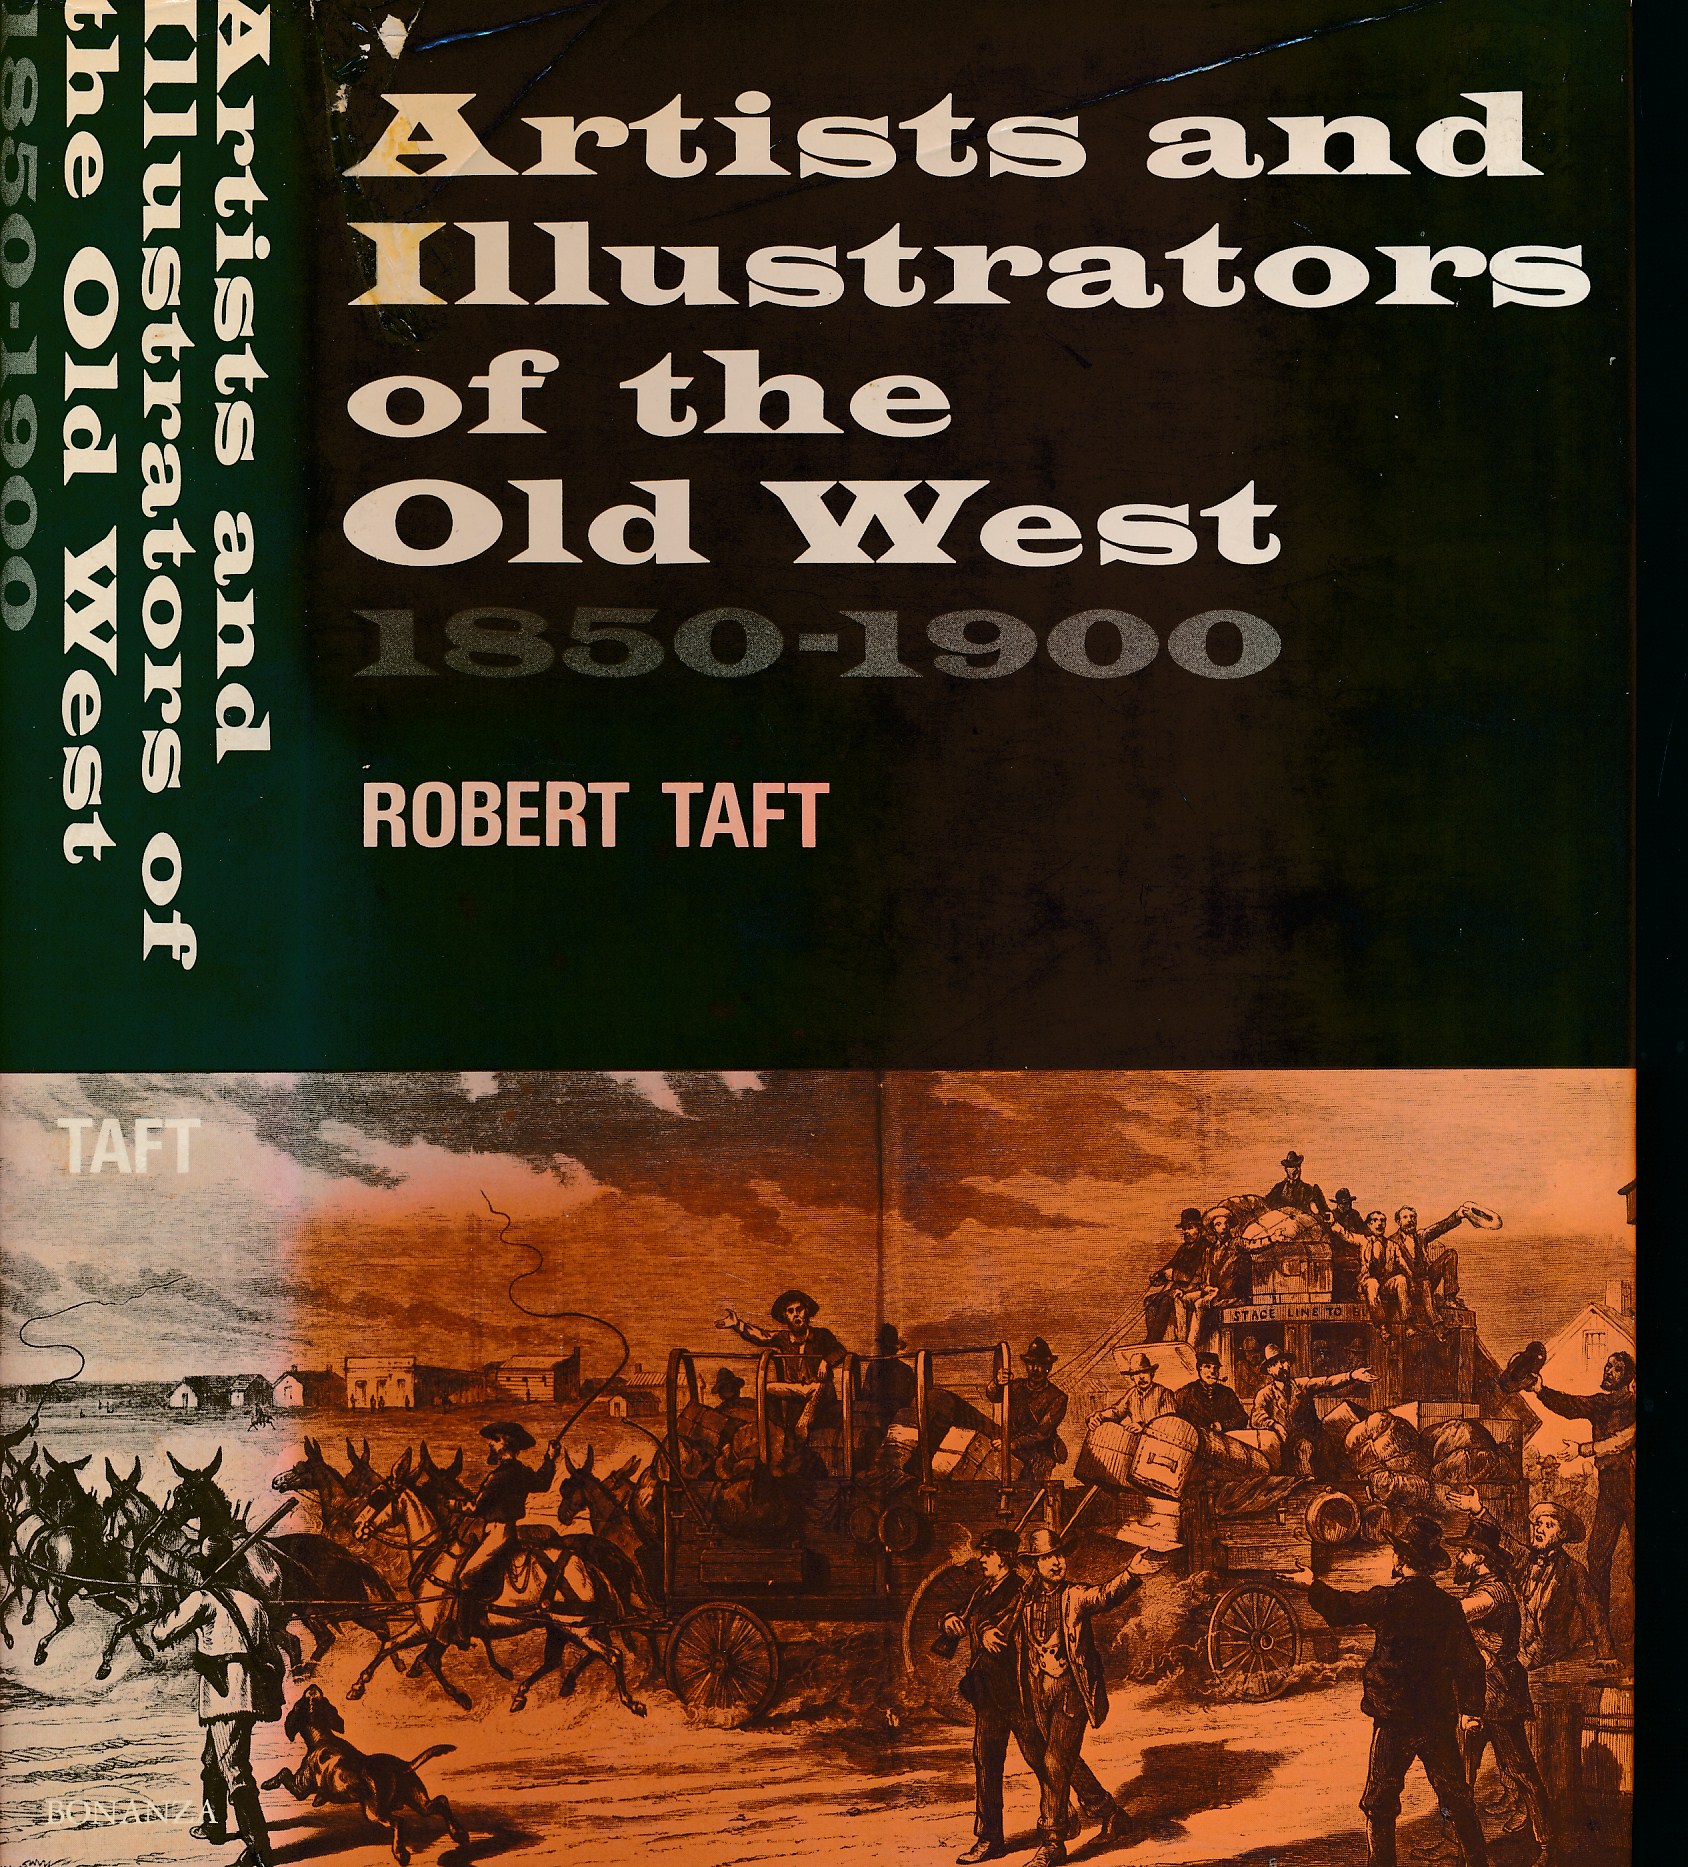 Artists and Illustrators of the Old West 1850-1900